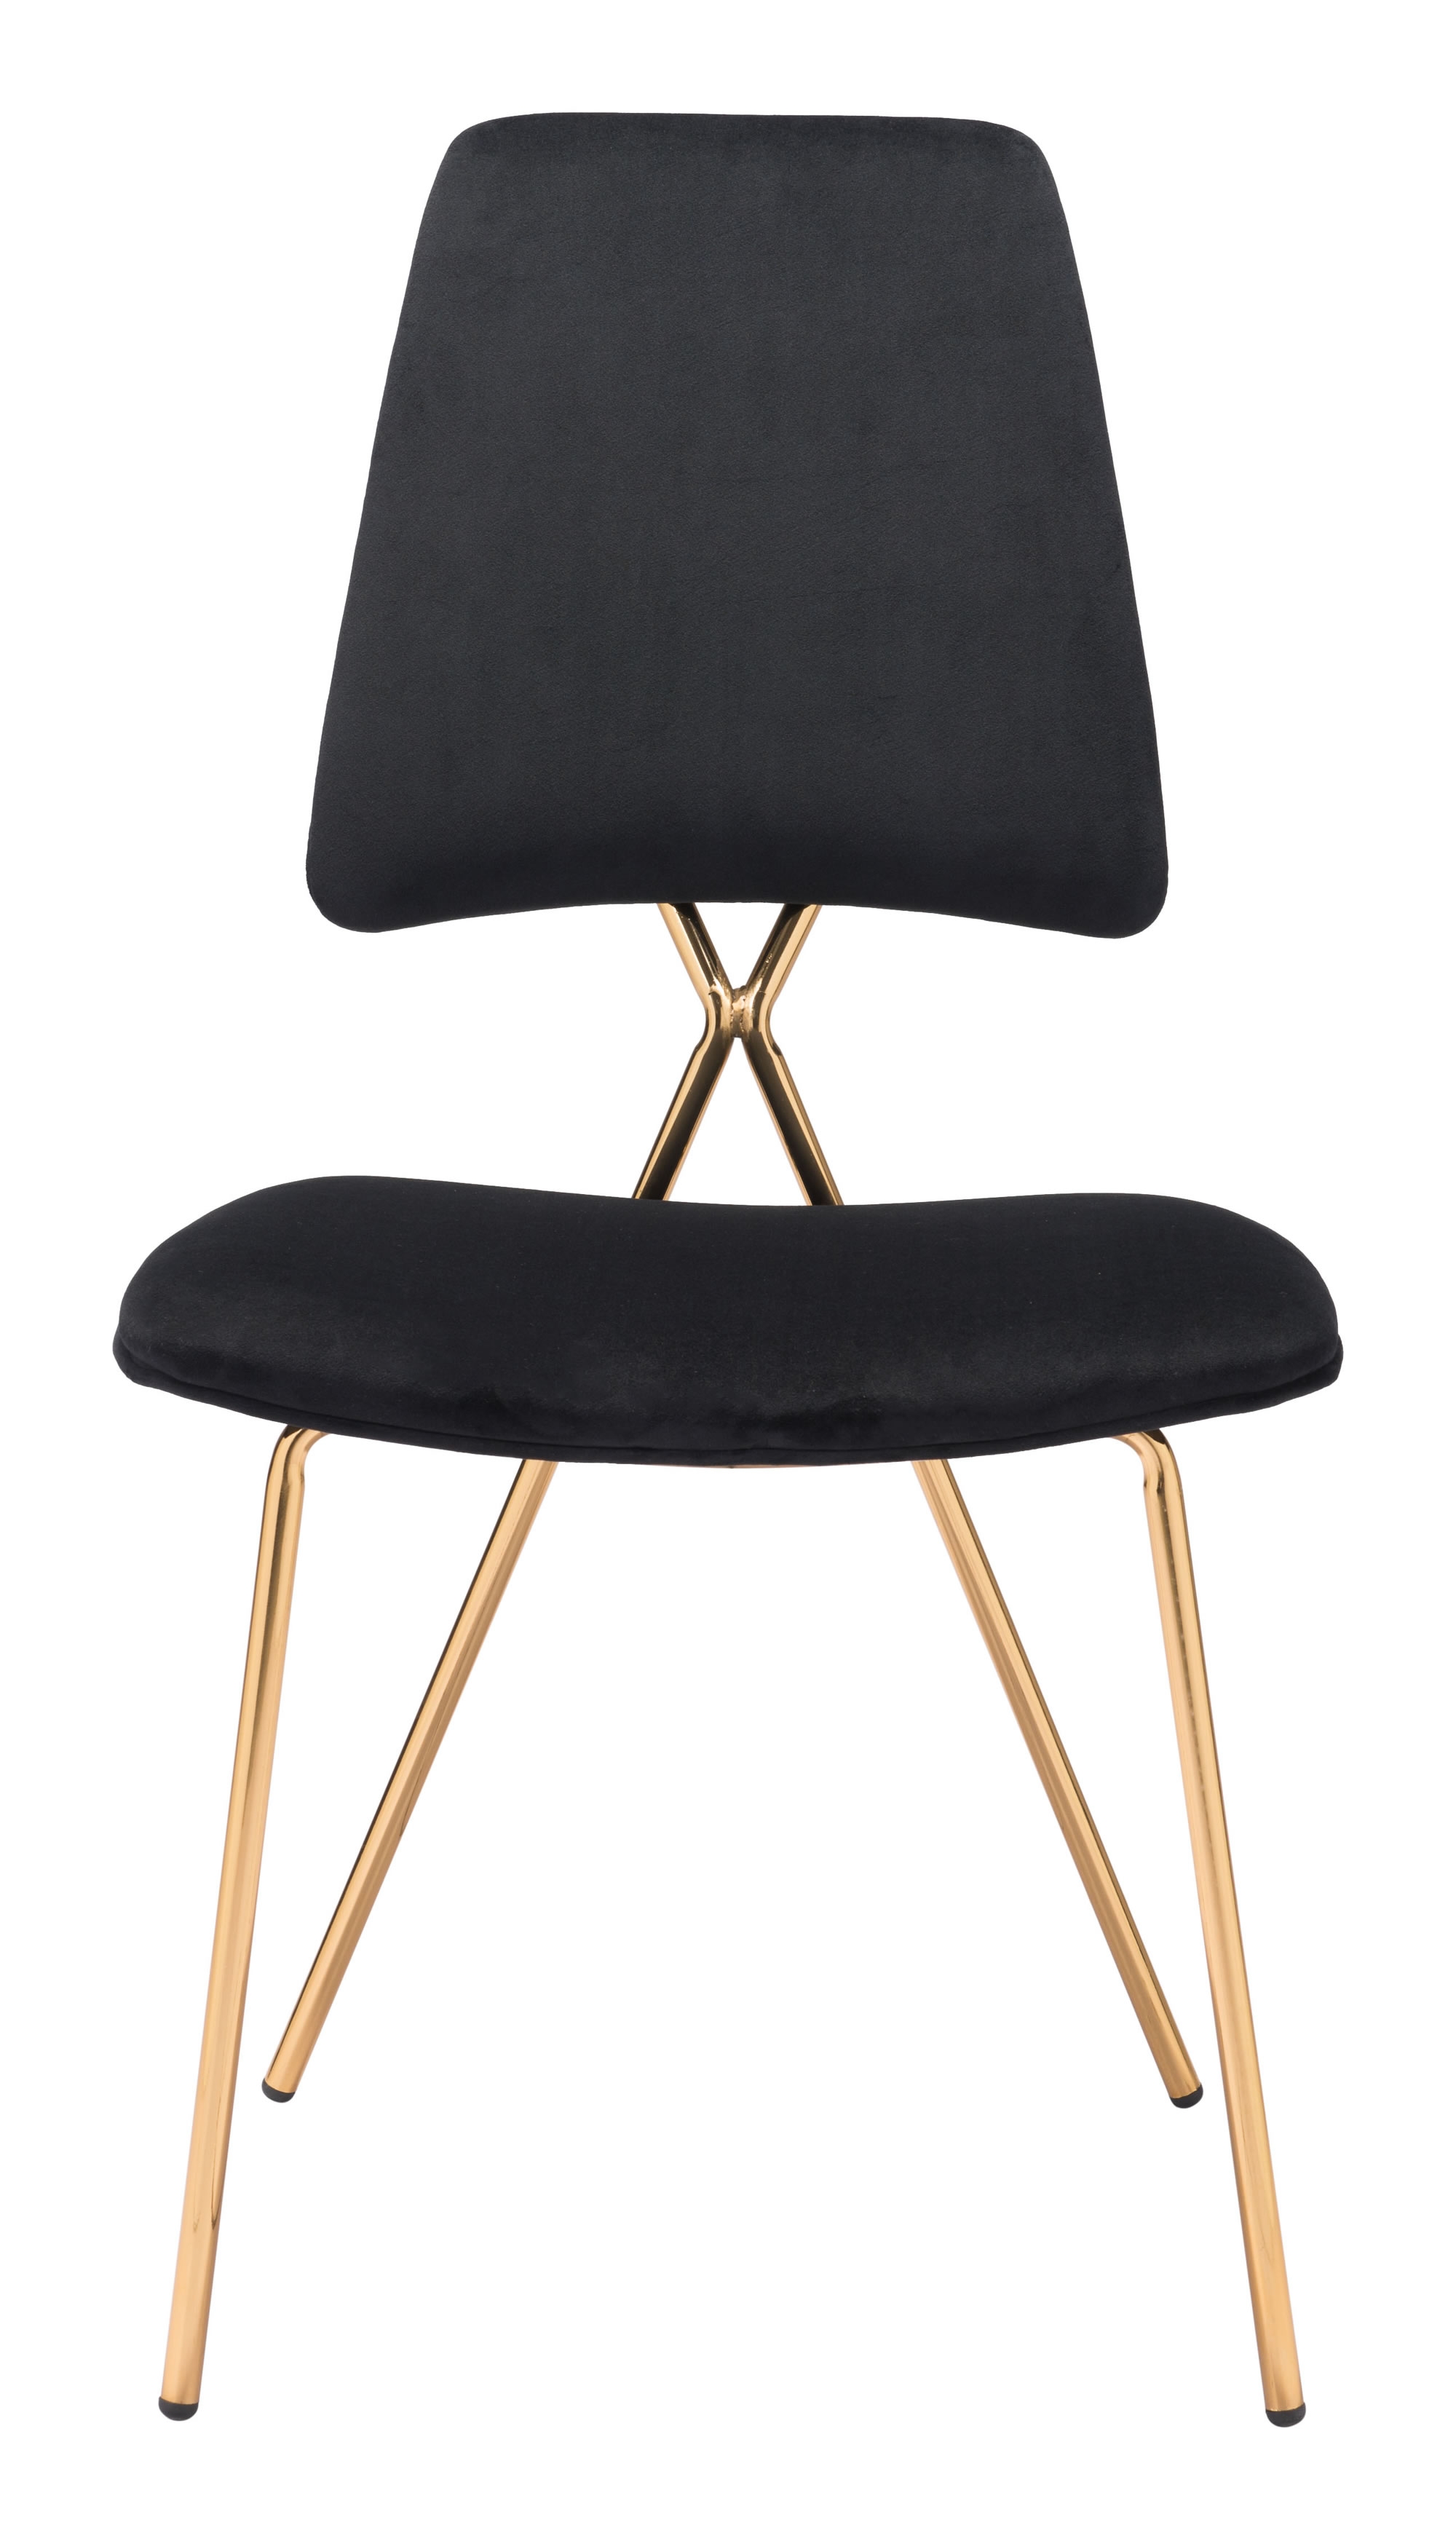 Chloe Dining Chair (Set of 2) Black & Gold - Image 2